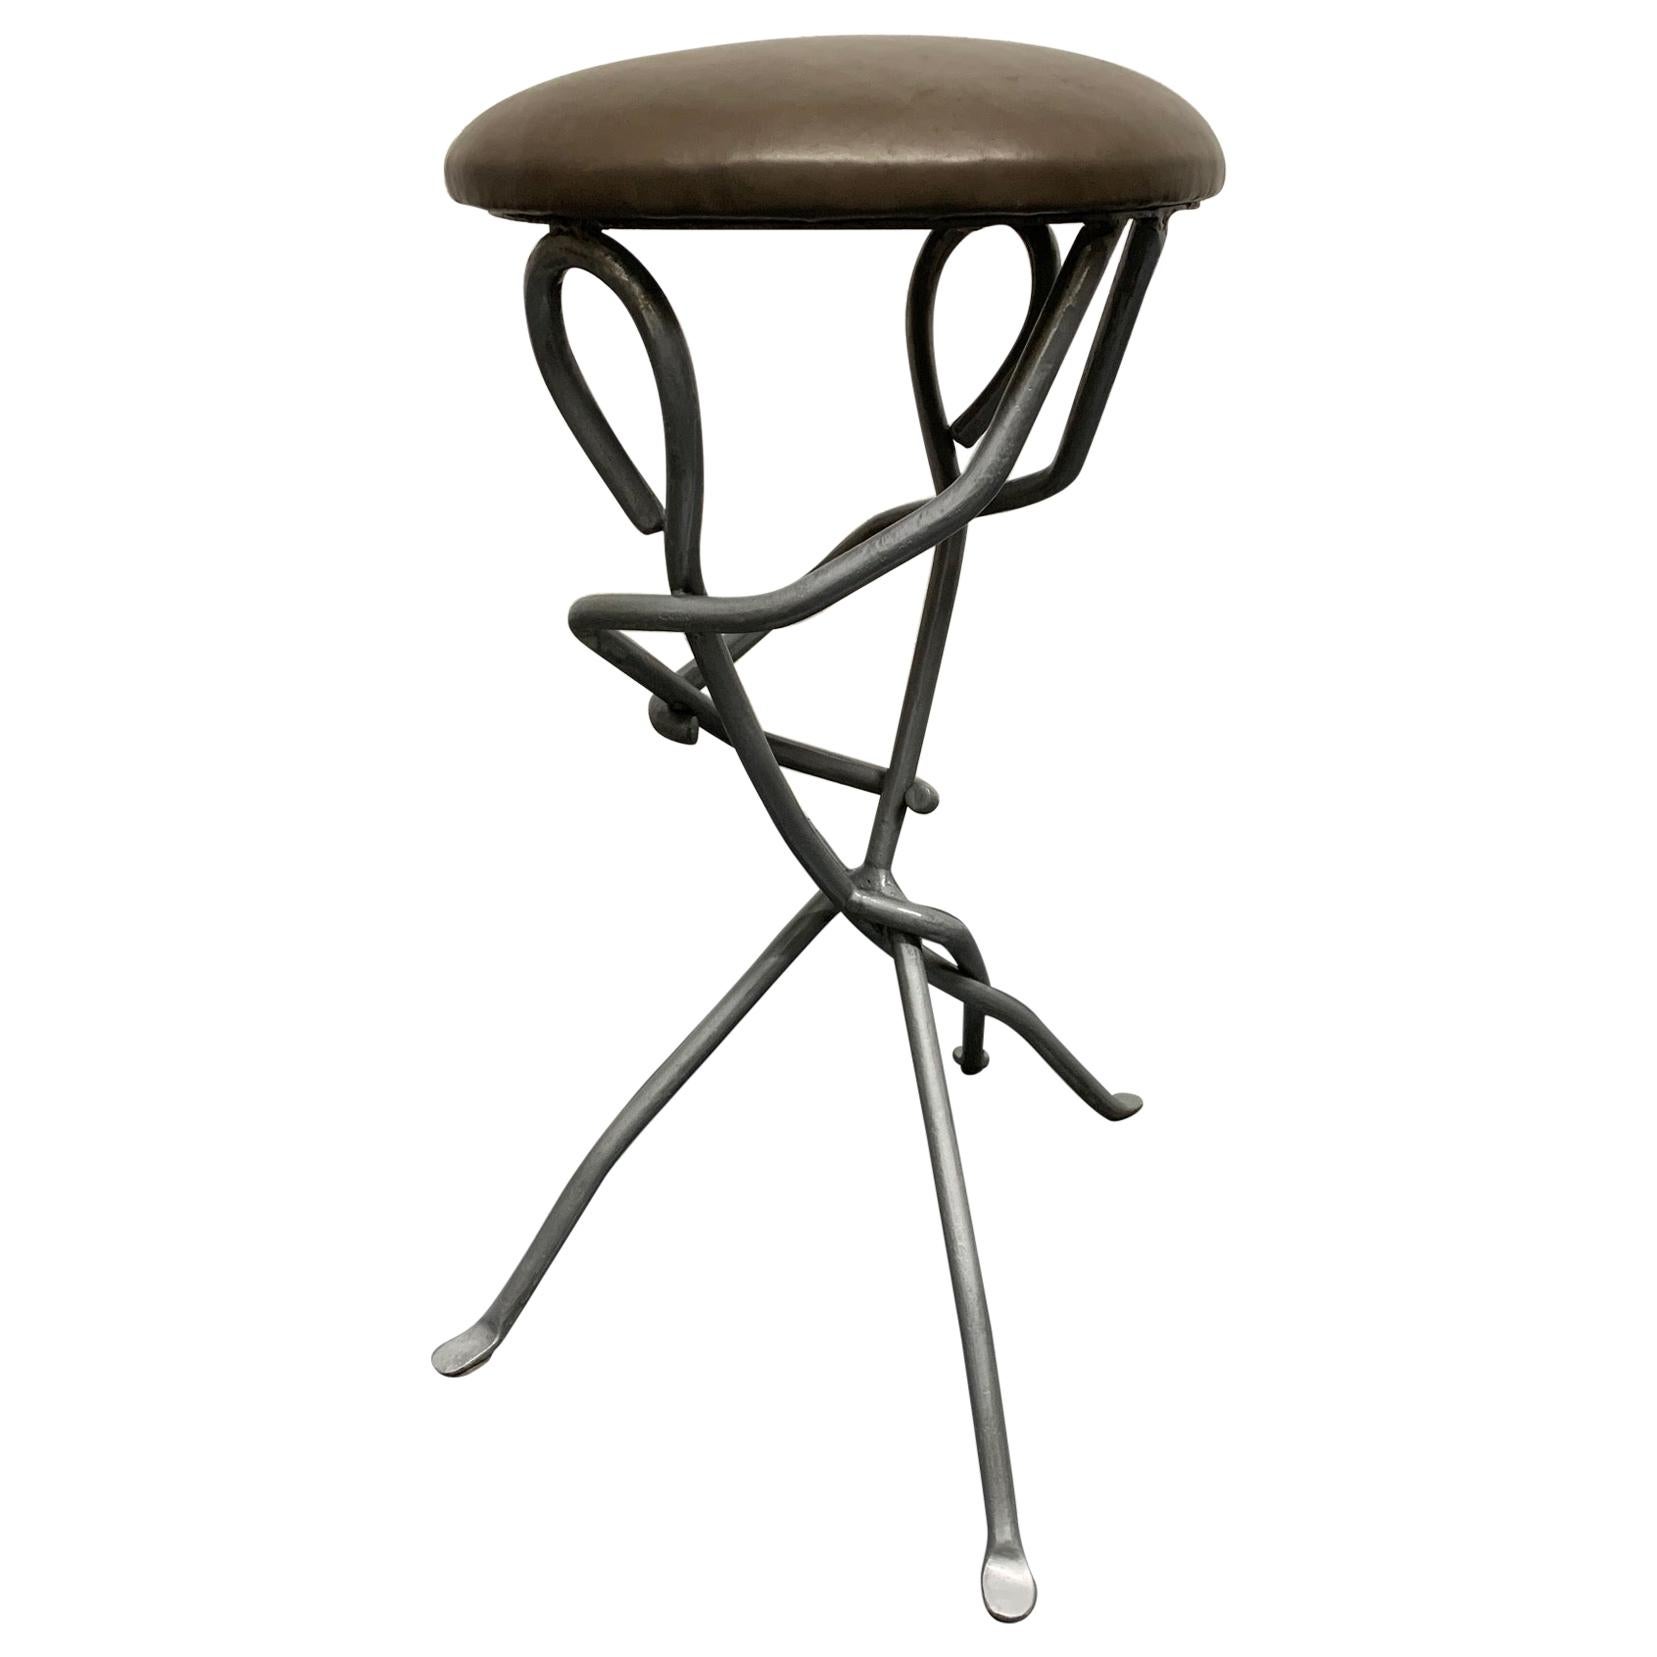 Modern Sculptural Wrought Iron Stool For Sale